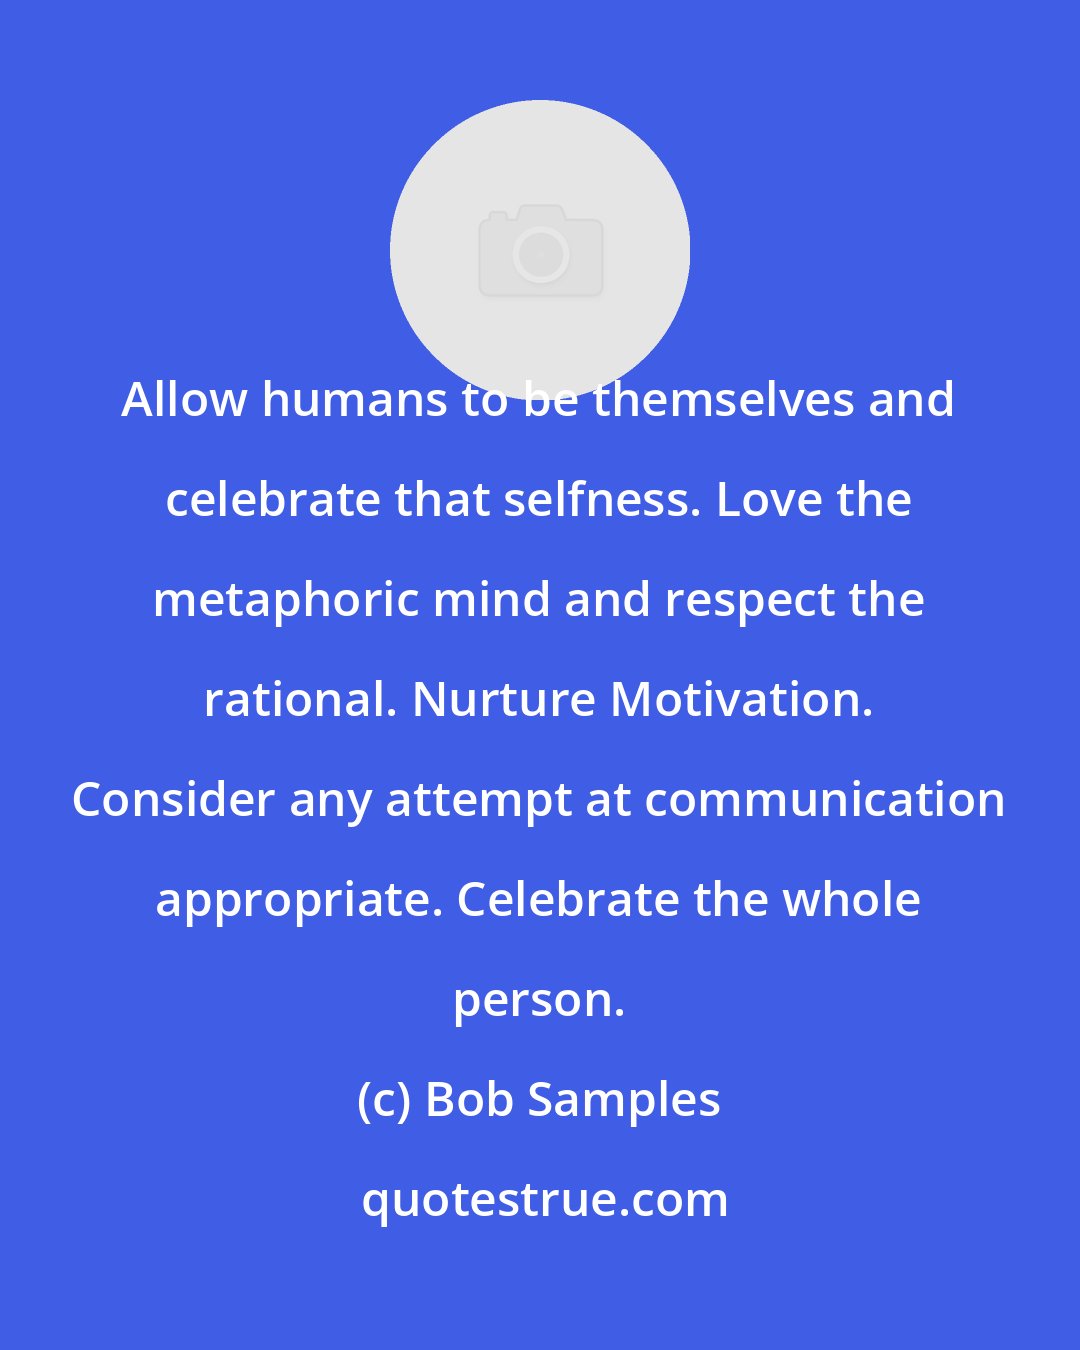 Bob Samples: Allow humans to be themselves and celebrate that selfness. Love the metaphoric mind and respect the rational. Nurture Motivation. Consider any attempt at communication appropriate. Celebrate the whole person.